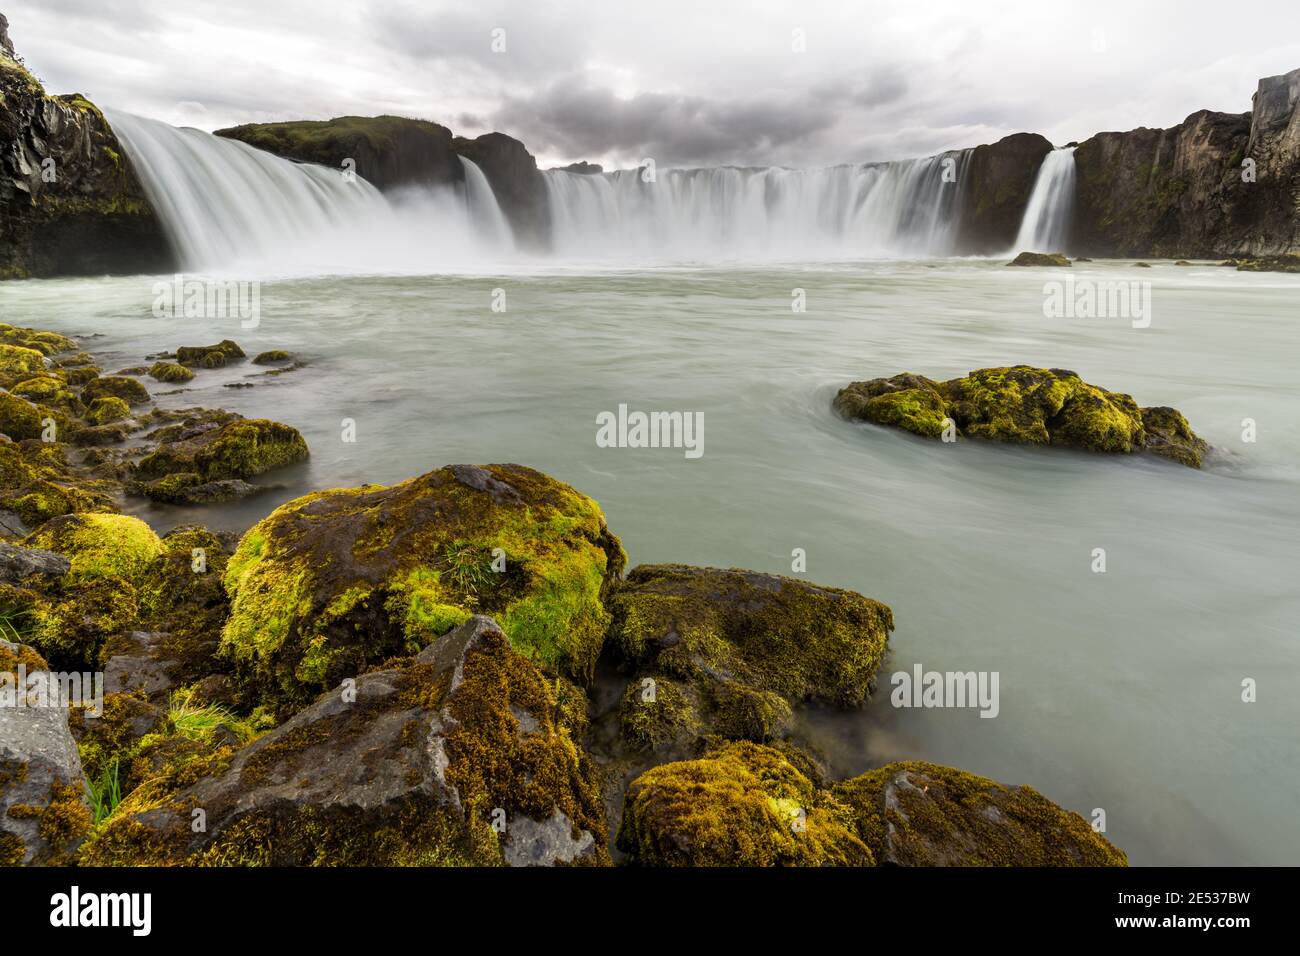 Icelandic landscape with moss-covered rocks in the foreground and Godafoss, one of the great waterfalls, in the background, under a cloudy sky Stock Photo